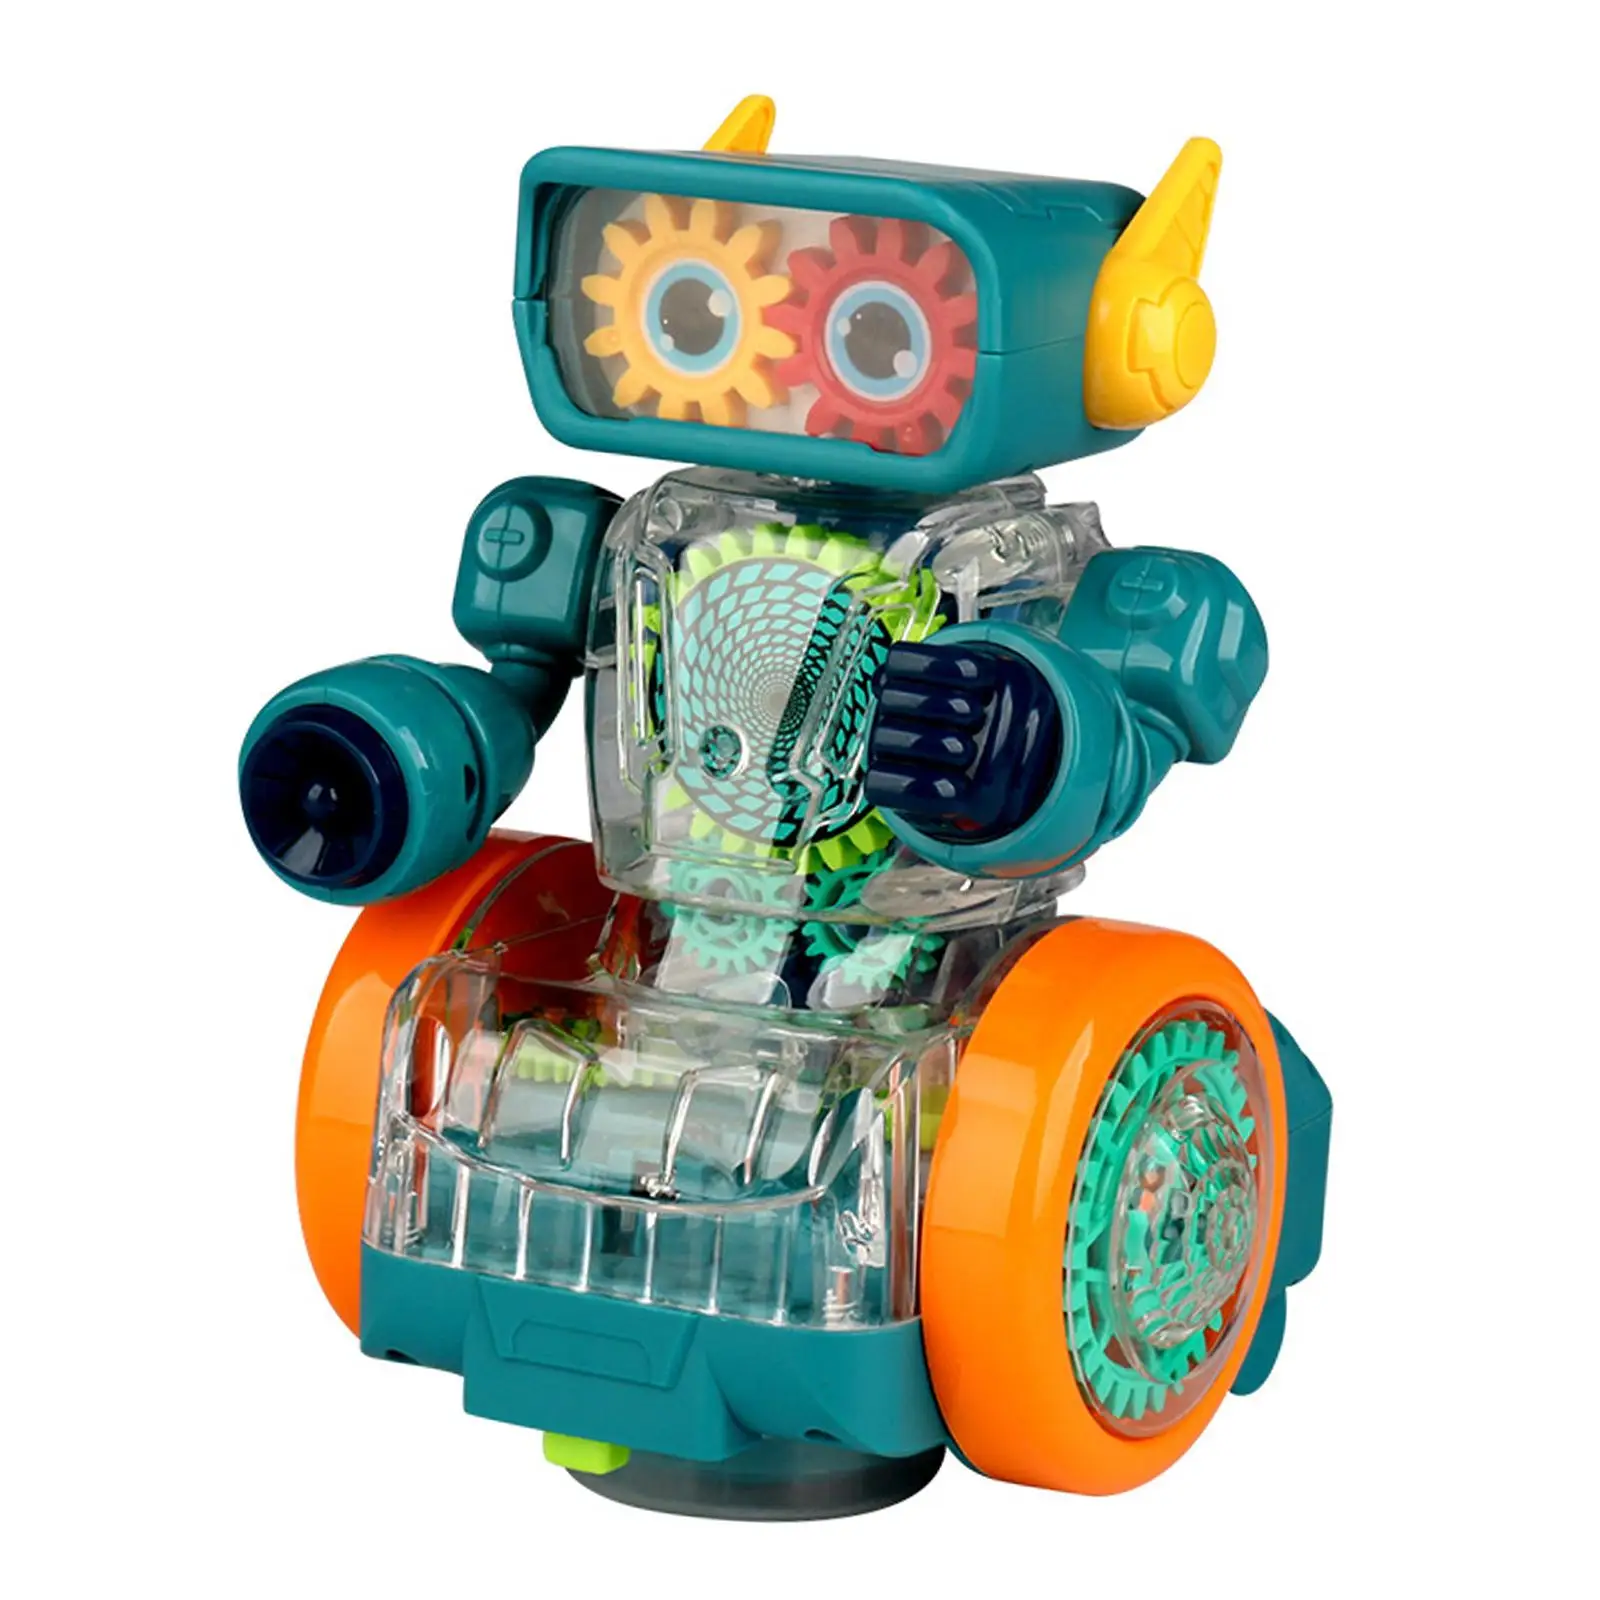 Transparent Mechanical Gear Robot Toy Early Educational Toys with Lighting for Toddlers Children Boys Kids Birthday Gifts